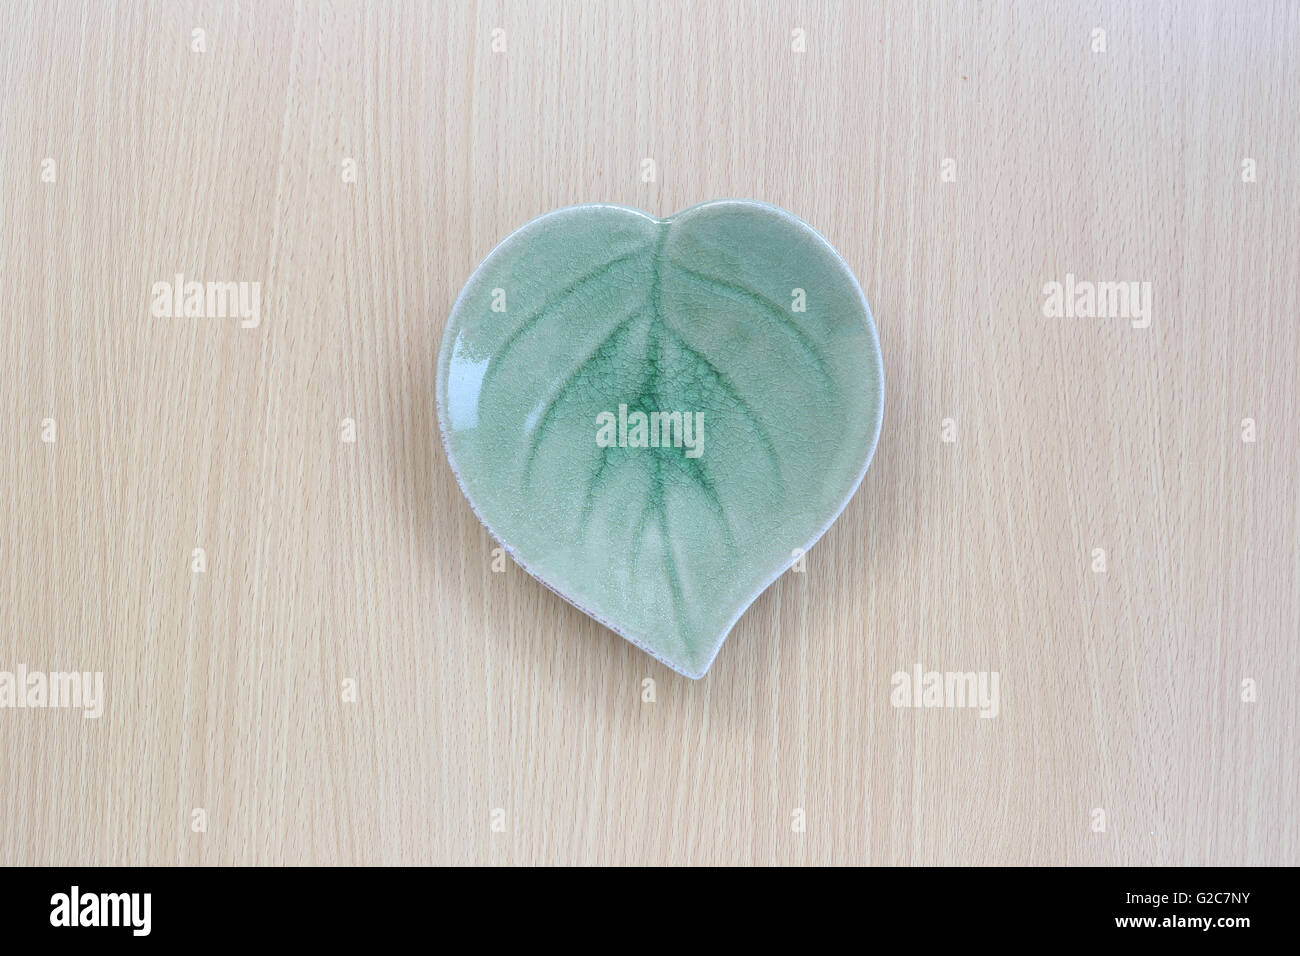 Green leaf shape dish in top view on wood background for design concept food. Stock Photo